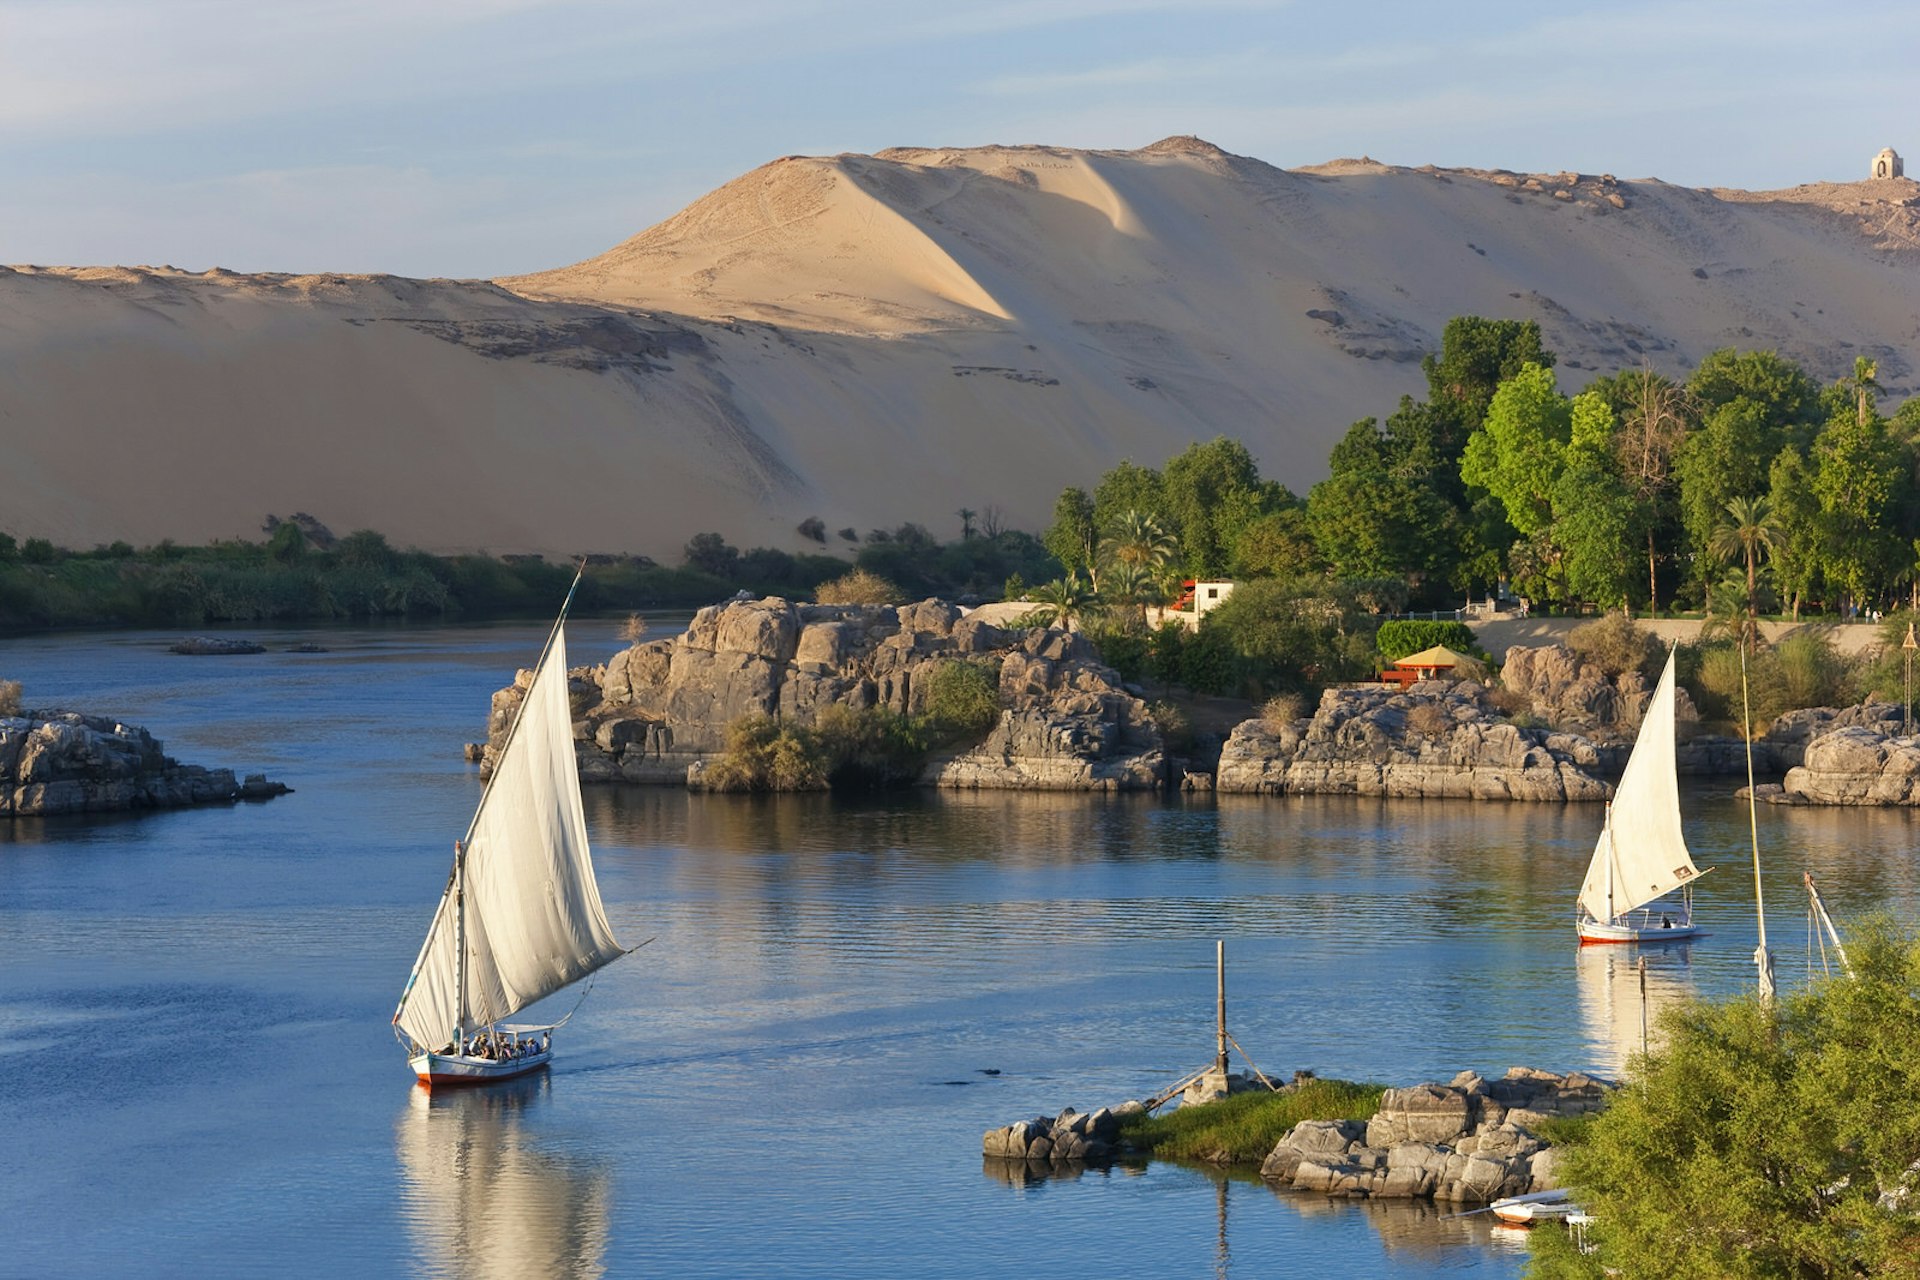 Felucca sailboats on River Nile, Aswan, Egypt. Image by Peter Adams / Getty Images